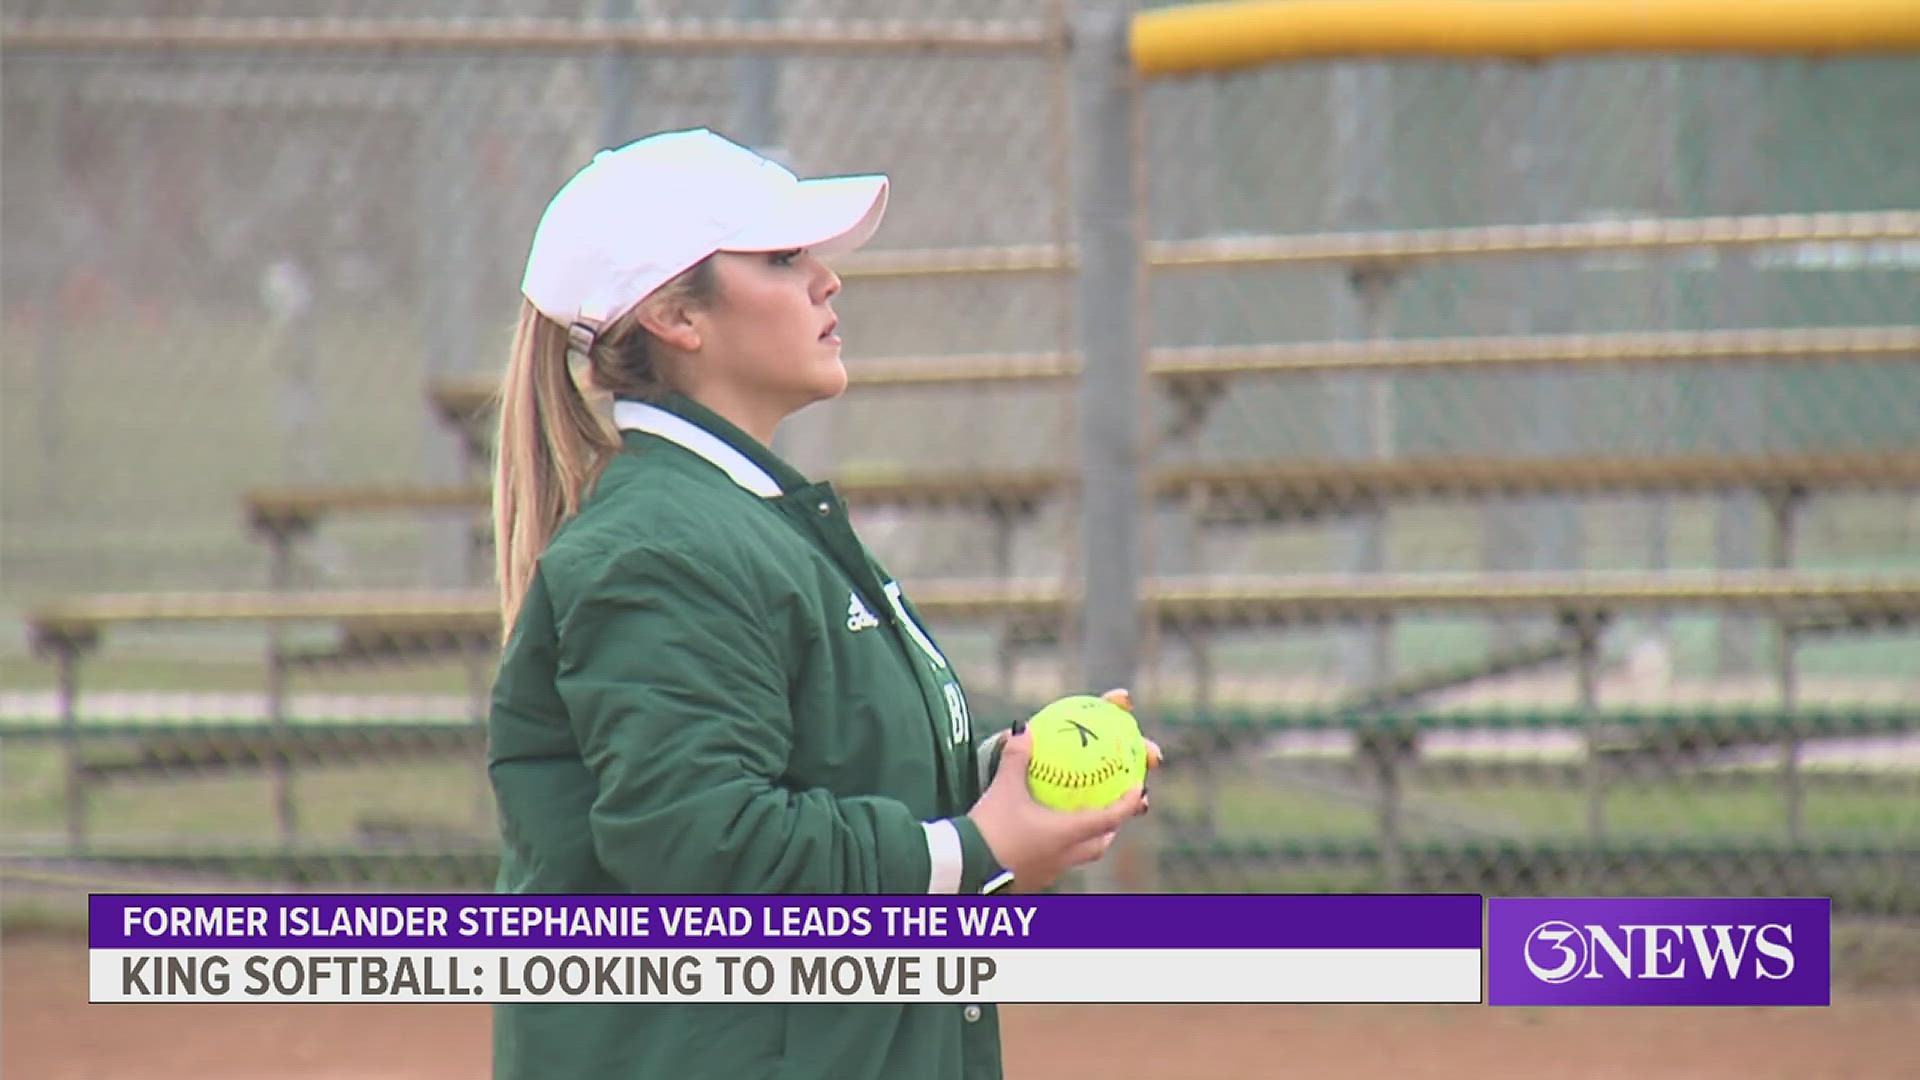 The Mustangs struggled in Stephanie Vead's first season with King.